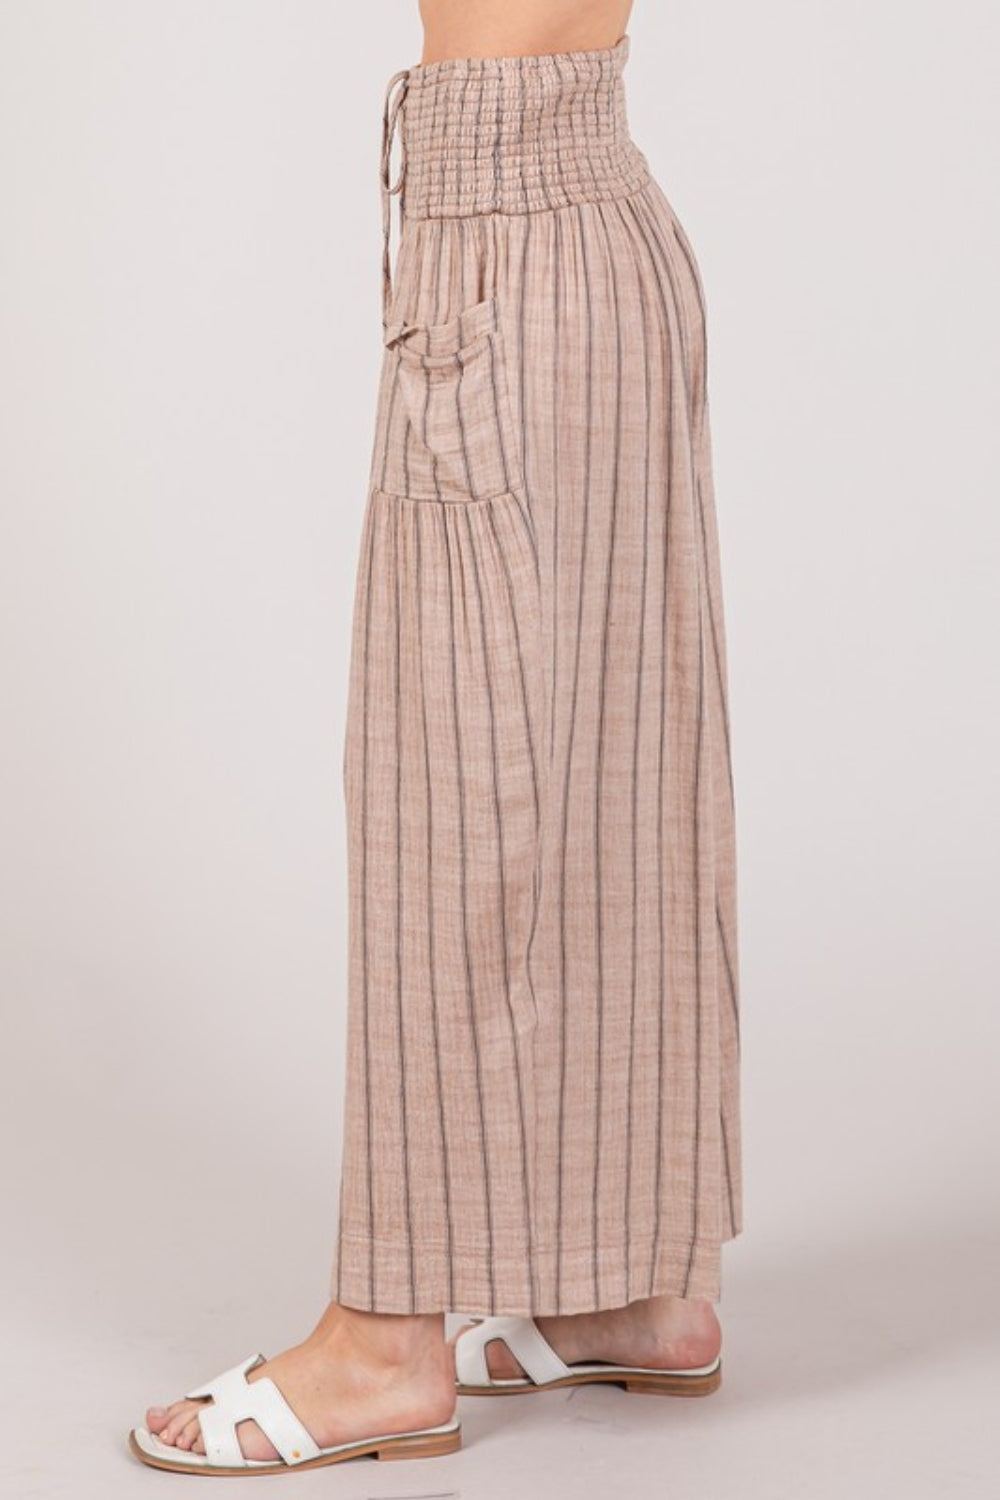 The Cotton Gauze Wash Stripe Pants are a comfortable and stylish choice for a casual and laid-back look. These pants feature a breathable cotton gauze fabric with a washed stripe pattern, adding a touch of texture and interest to your outfit. 